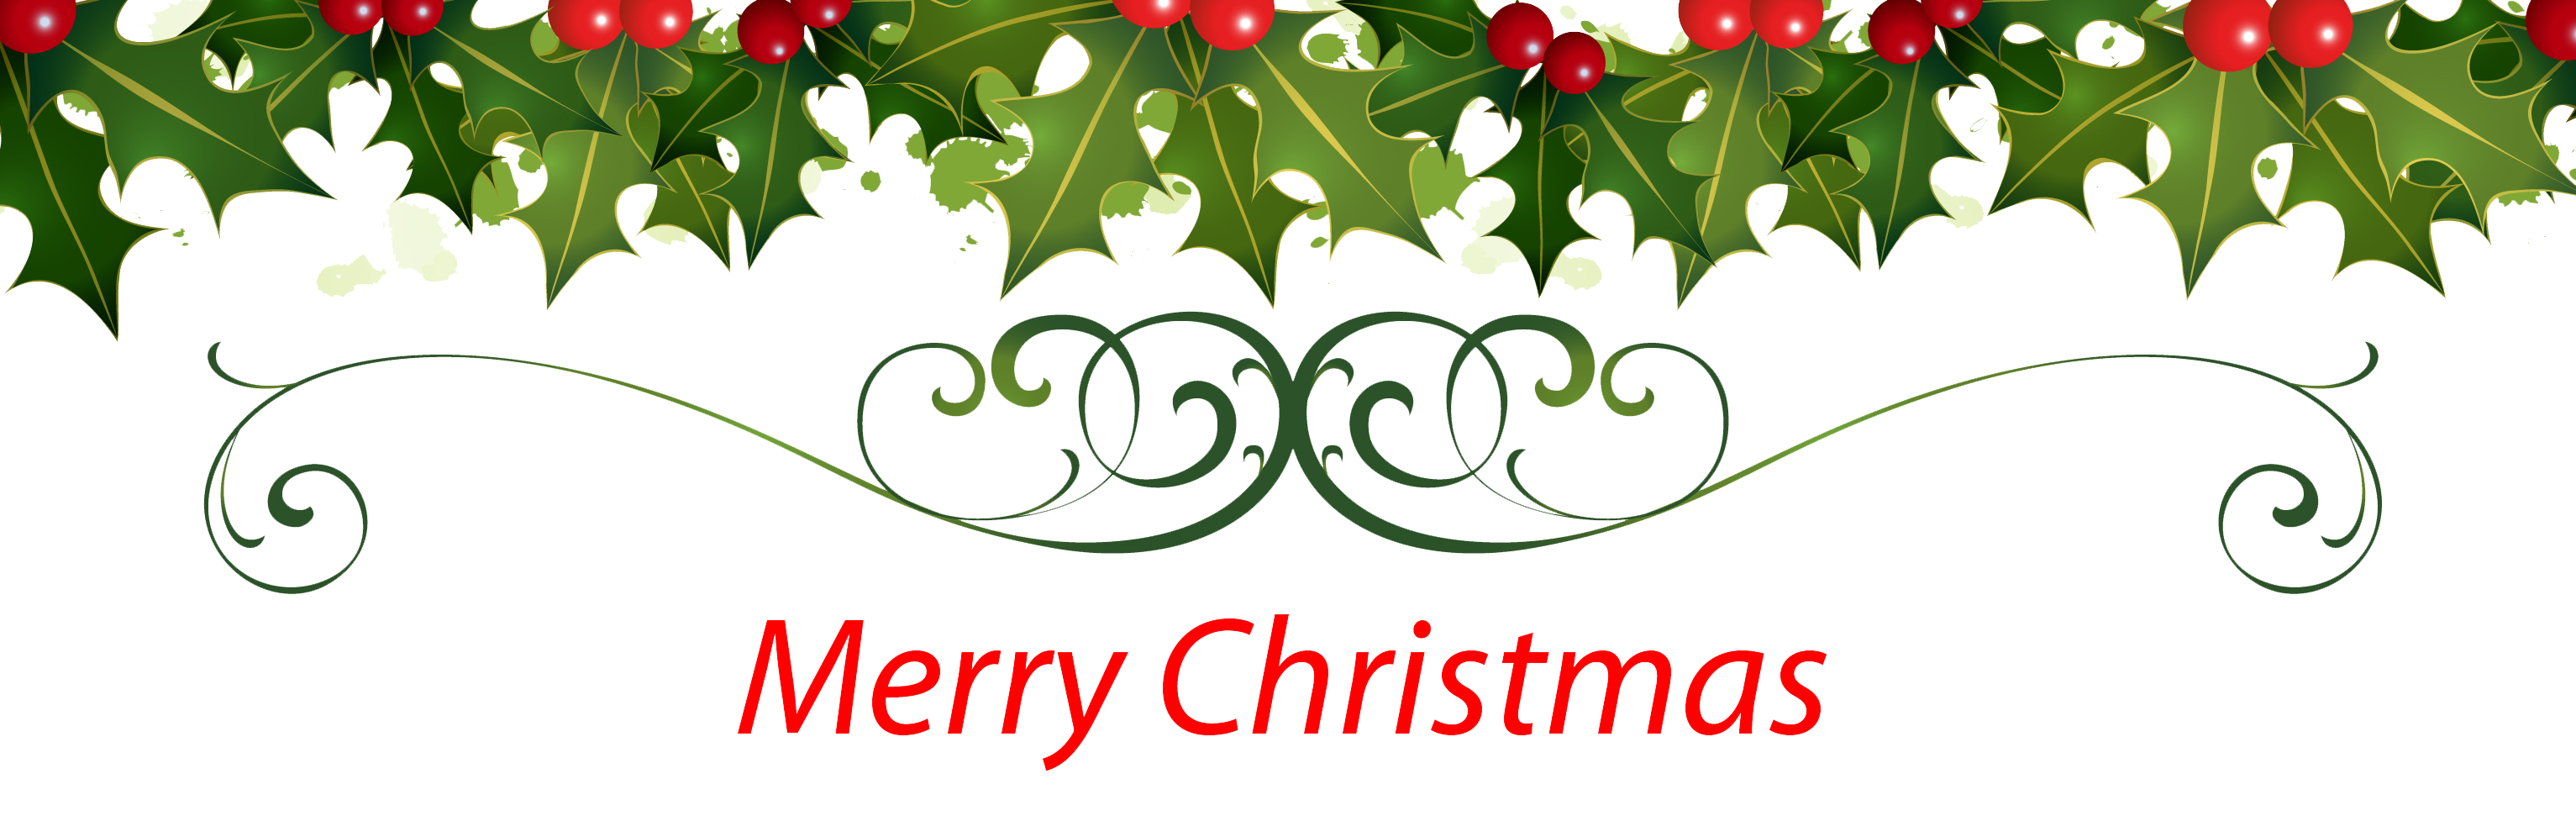 Christmas Free Png Image Png Image - Christmas, Transparent background PNG HD thumbnail